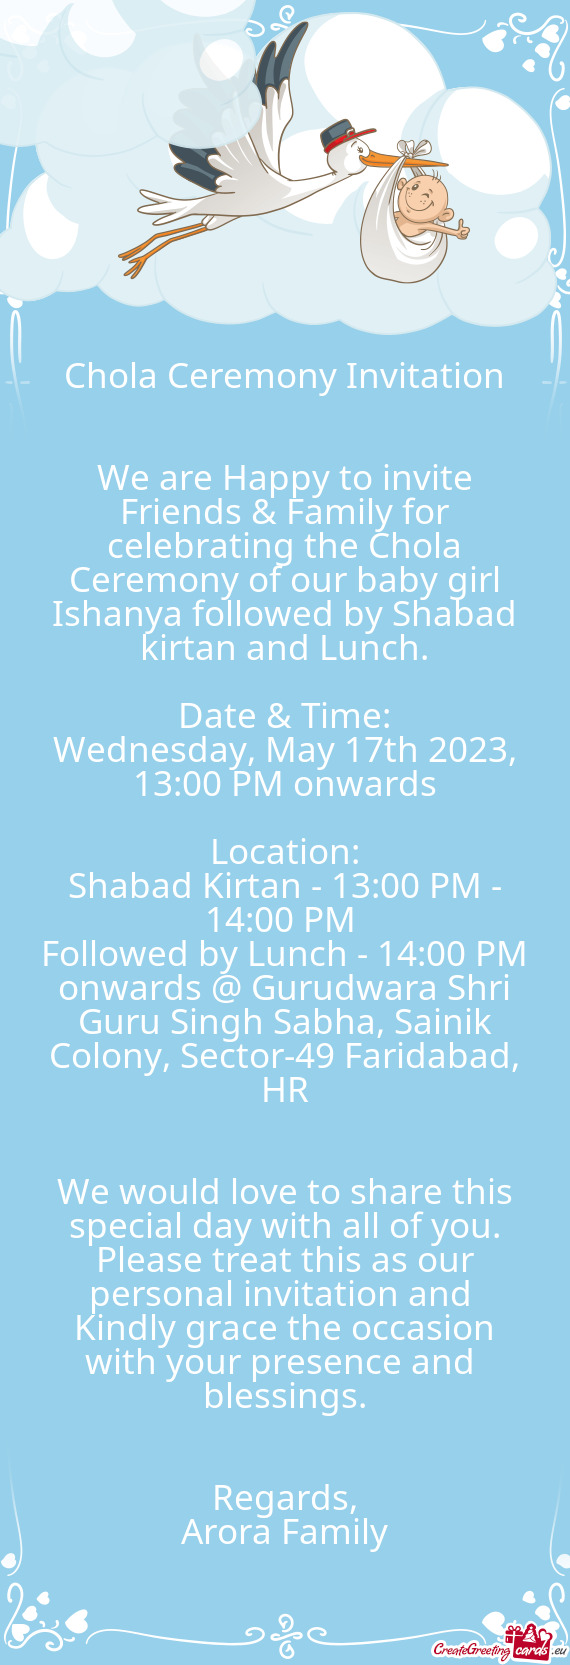 We are Happy to invite Friends & Family for celebrating the Chola Ceremony of our baby girl Ishanya